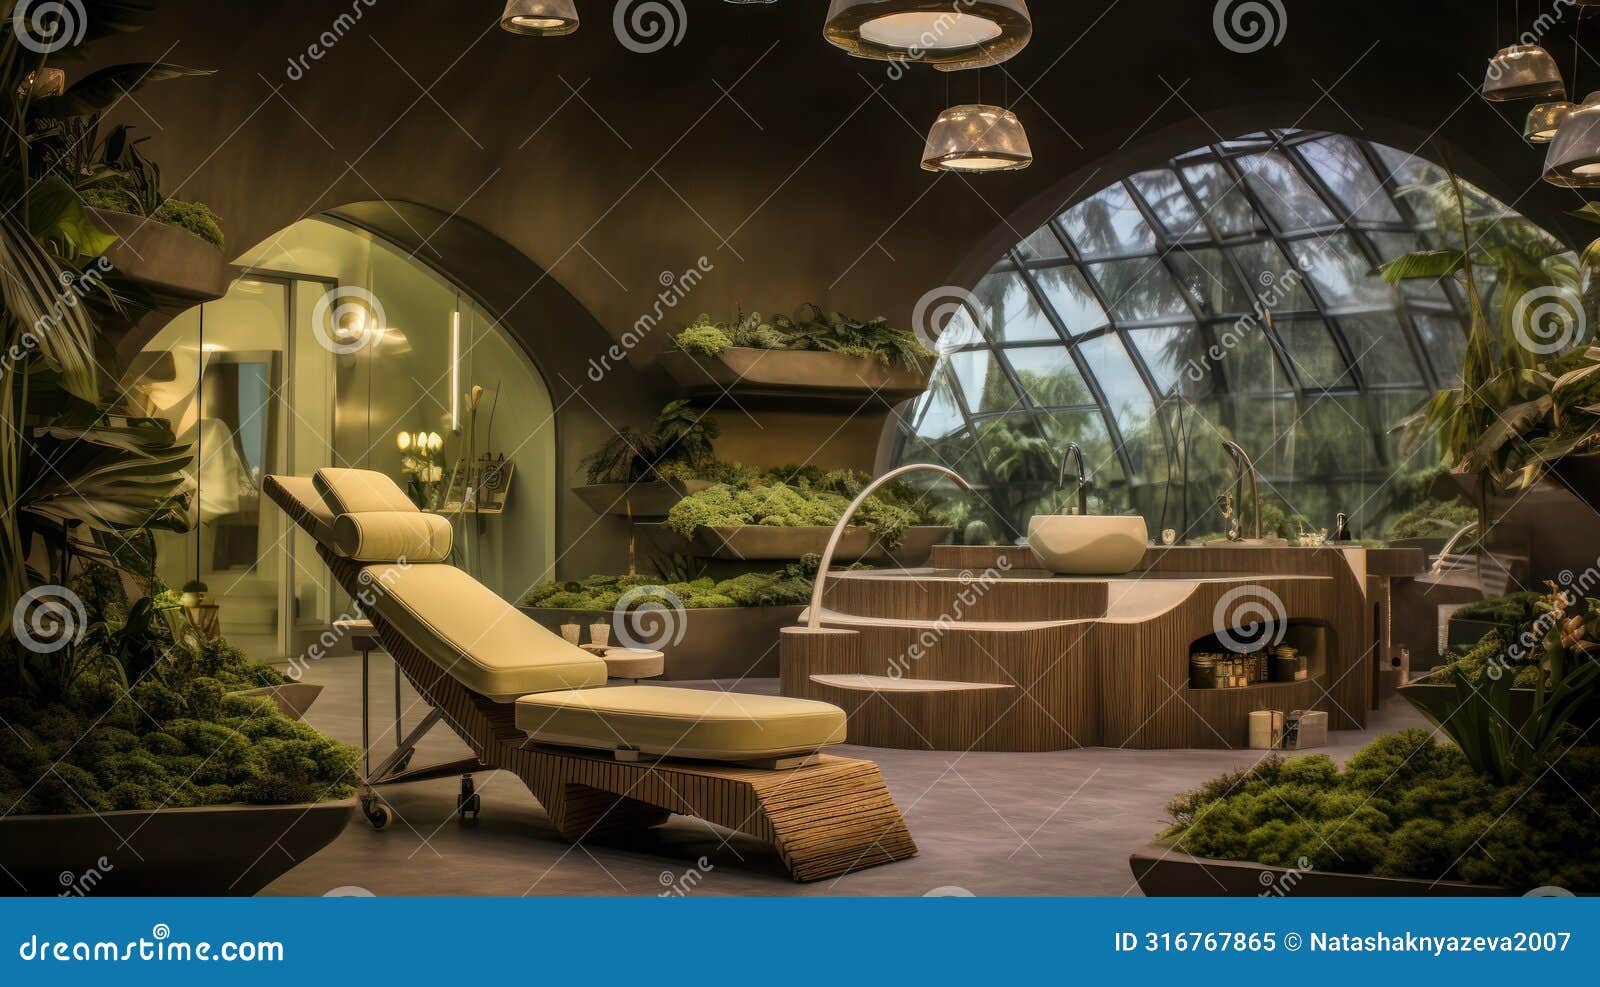 interior of luxury spa salon in eco style, treatment area decorated with live plants.